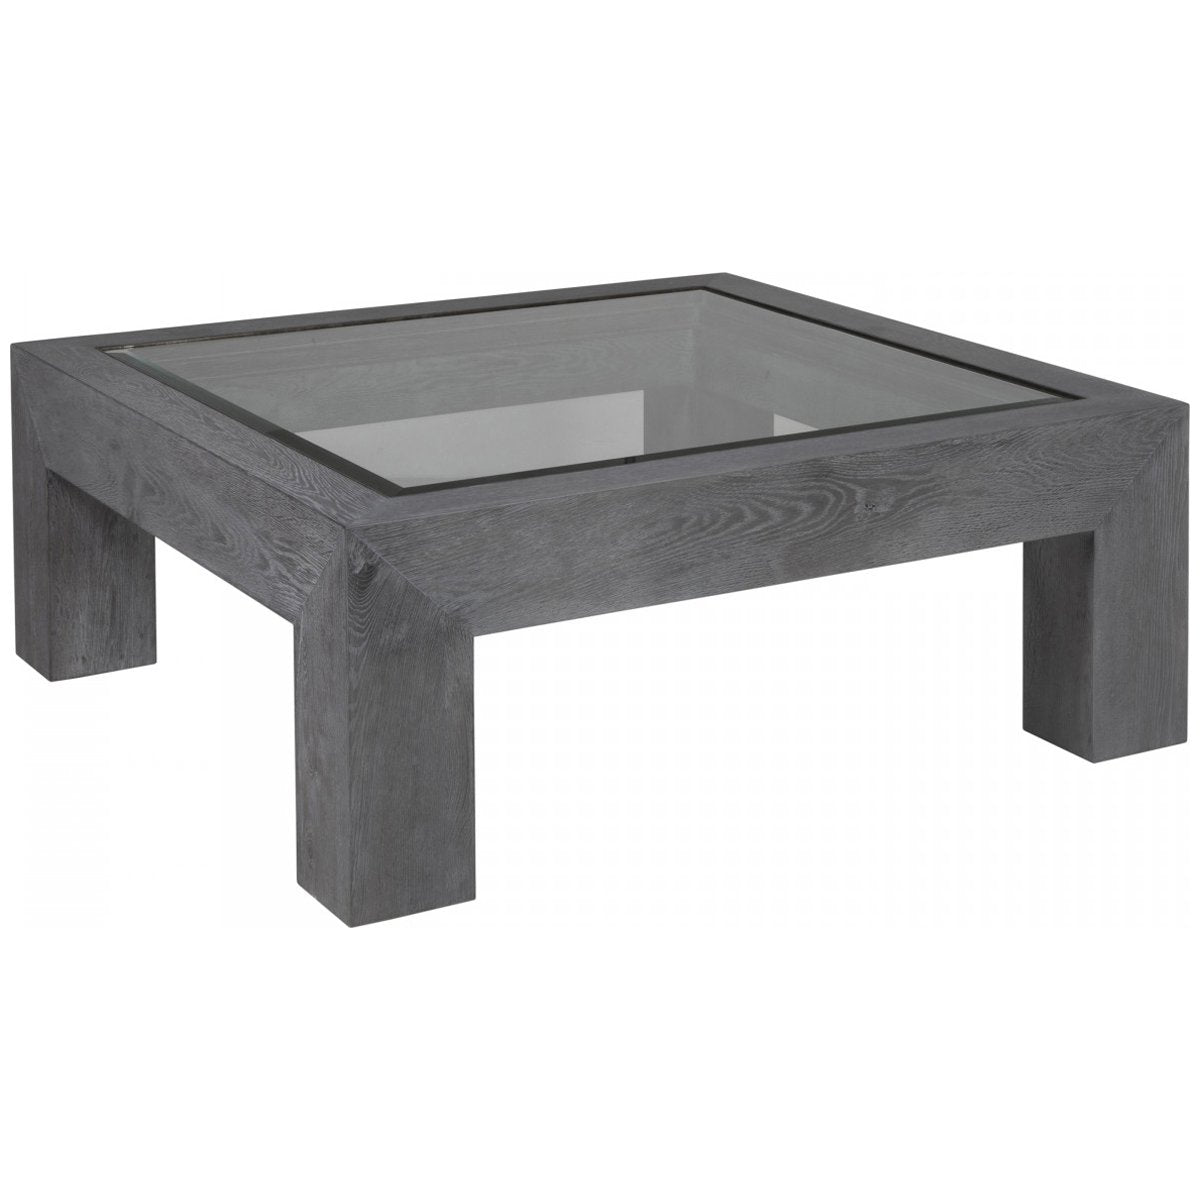 Artistica Home Accolade Square Cocktail Table 2211-947C